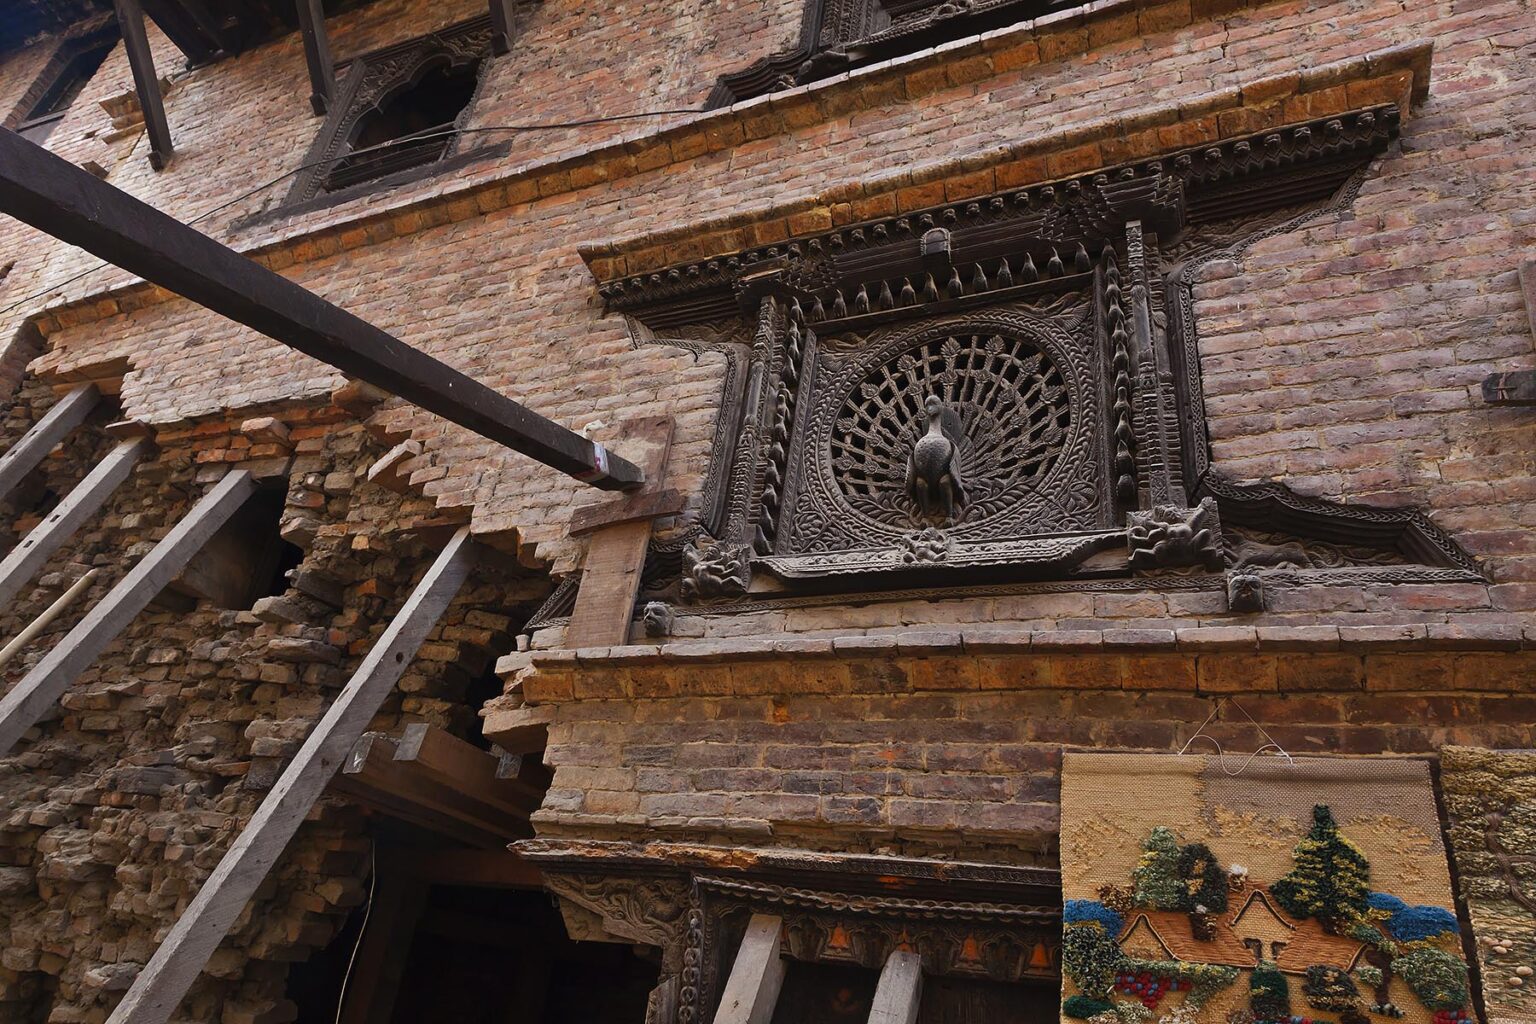 The traditional town of BHAKTAPUR which was severely damaged by the 2015 earthquake including the famous PEACOCK WINDOW - NEPAL